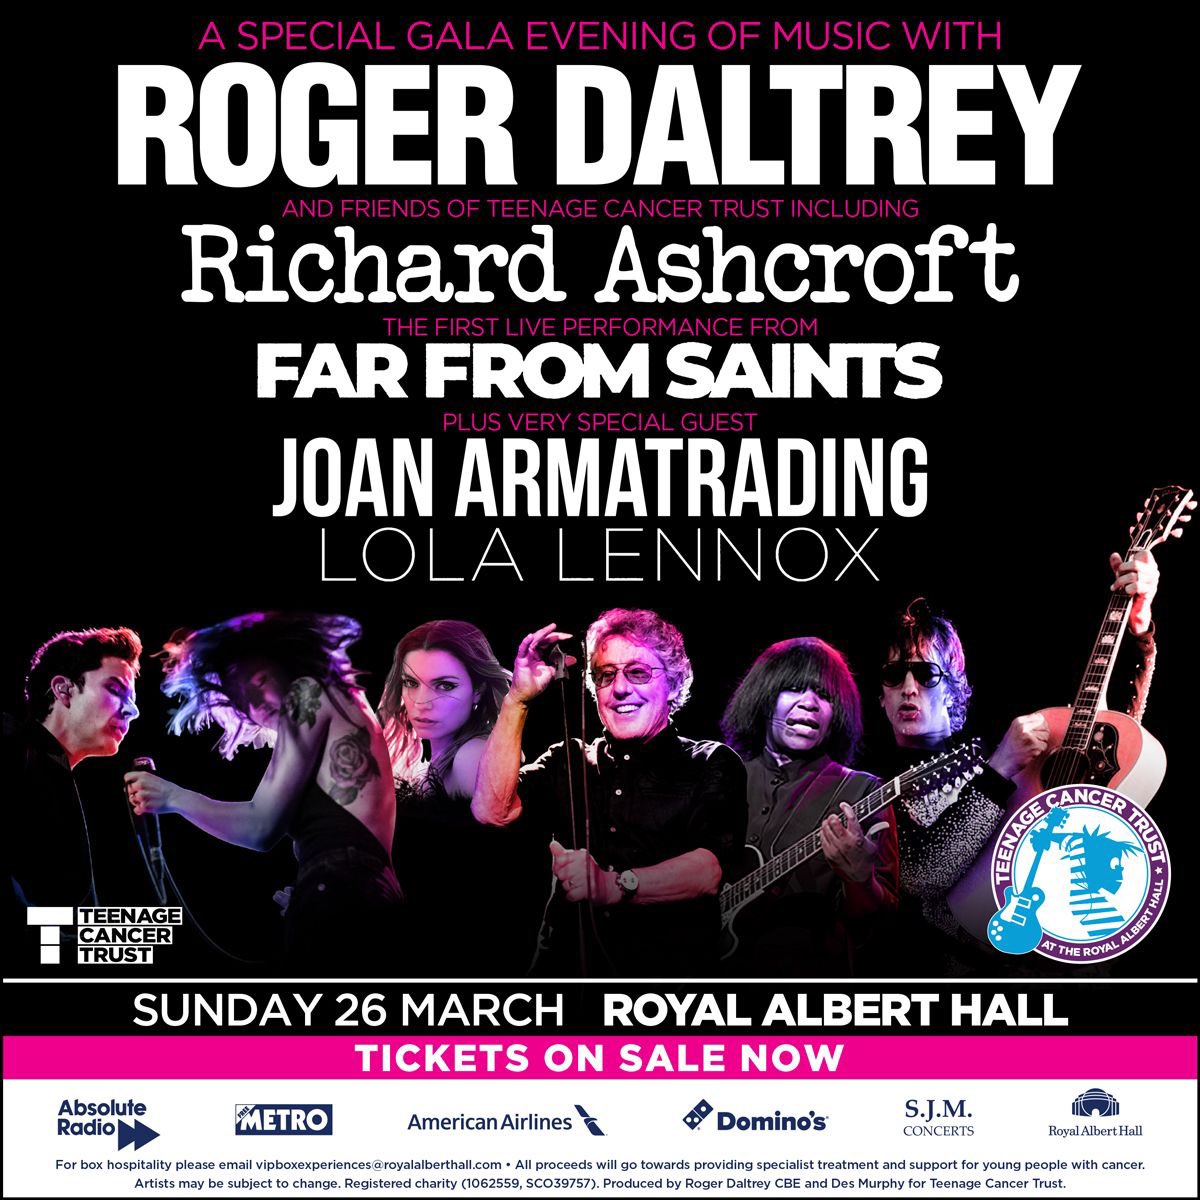 I am delighted to announce I’ll be performing at the Royal Albert Hall on March 26th for @teenage_cancer alongside @rogerdaltreyy @farfromsaintsband @richardashcroftofficial @joan_armatrading I’m honored to join such an amazing line up to raise money for such an important cause